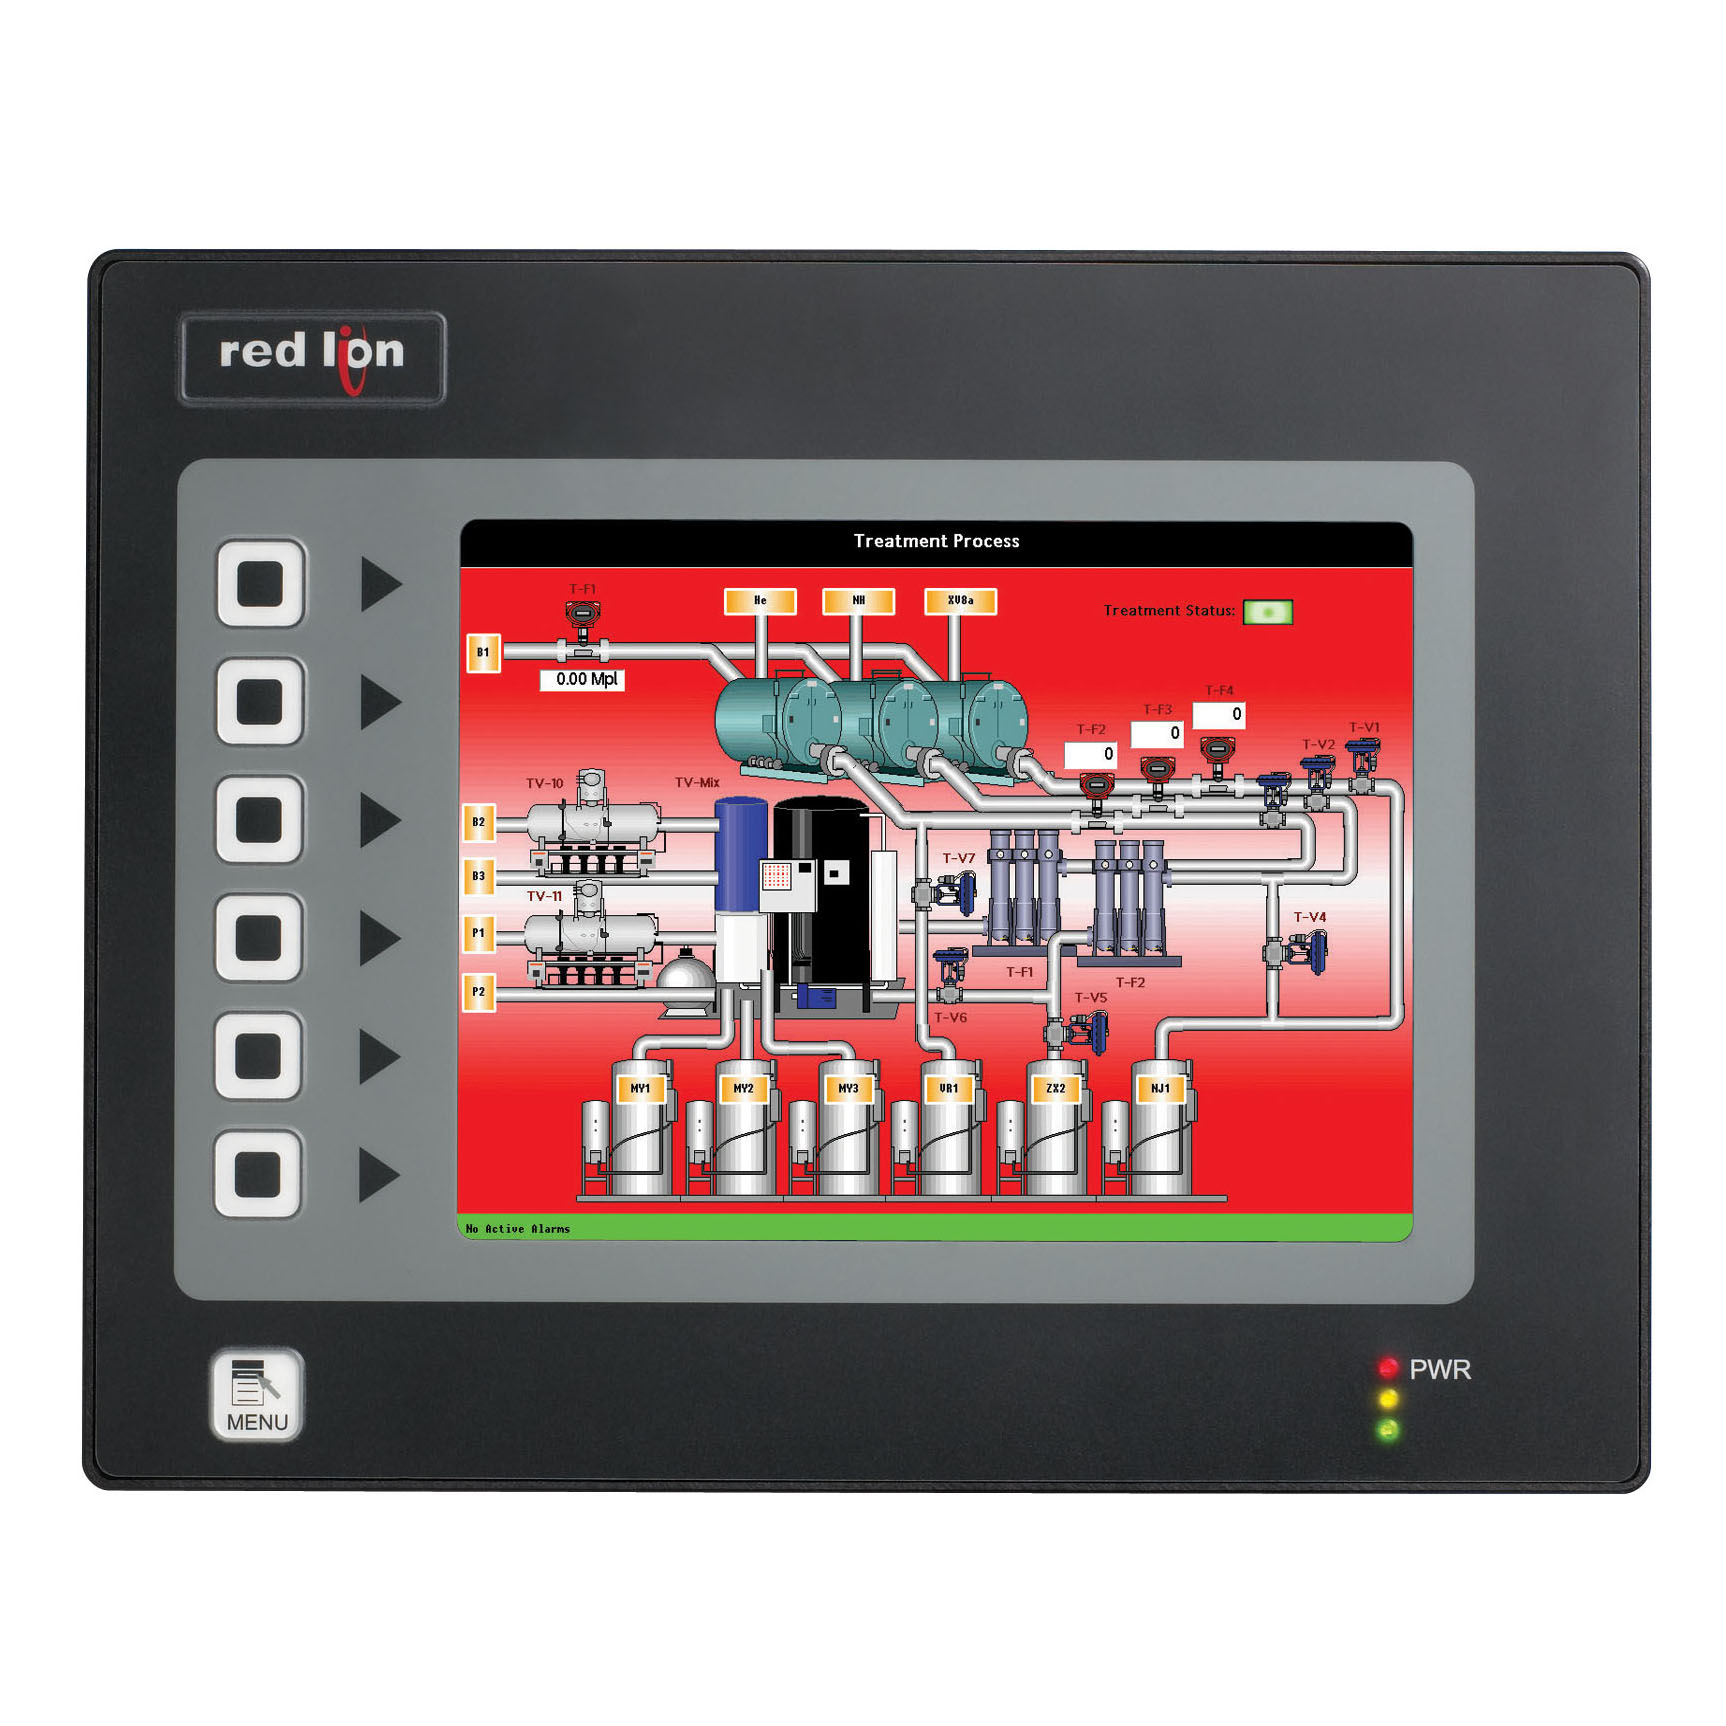 Red lion data station plus user manual youtube